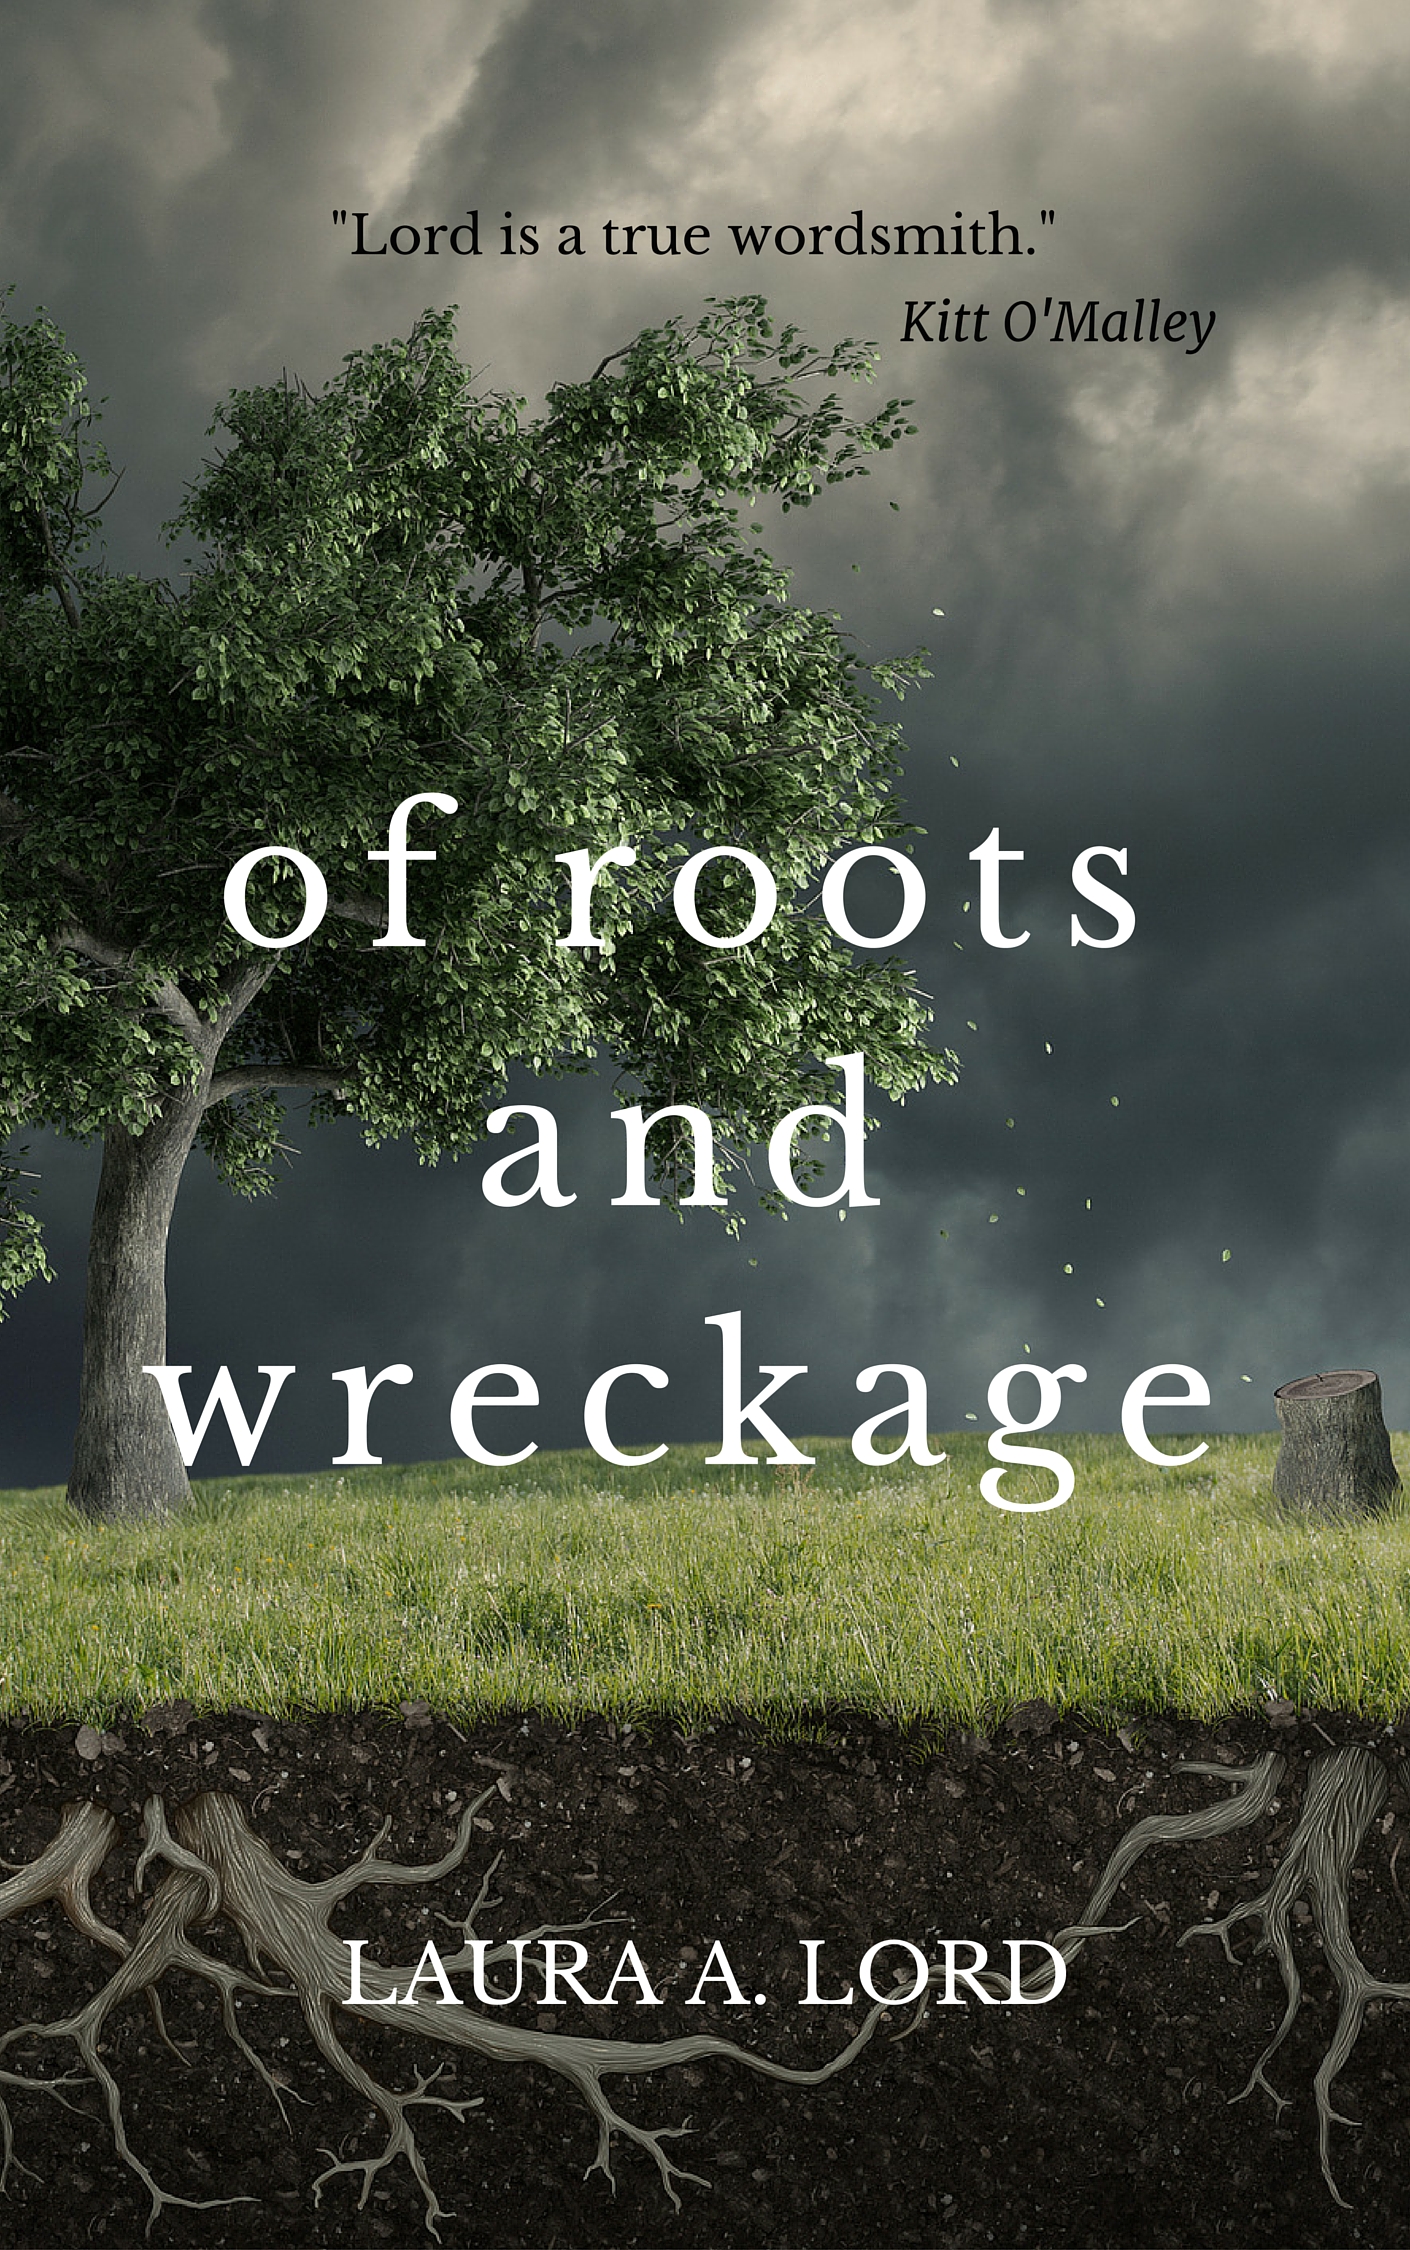 "Of Roots and Wreckage" by Laura A. Lord with quote by Kitt O'Malley, "Lord is a true wordsmith."